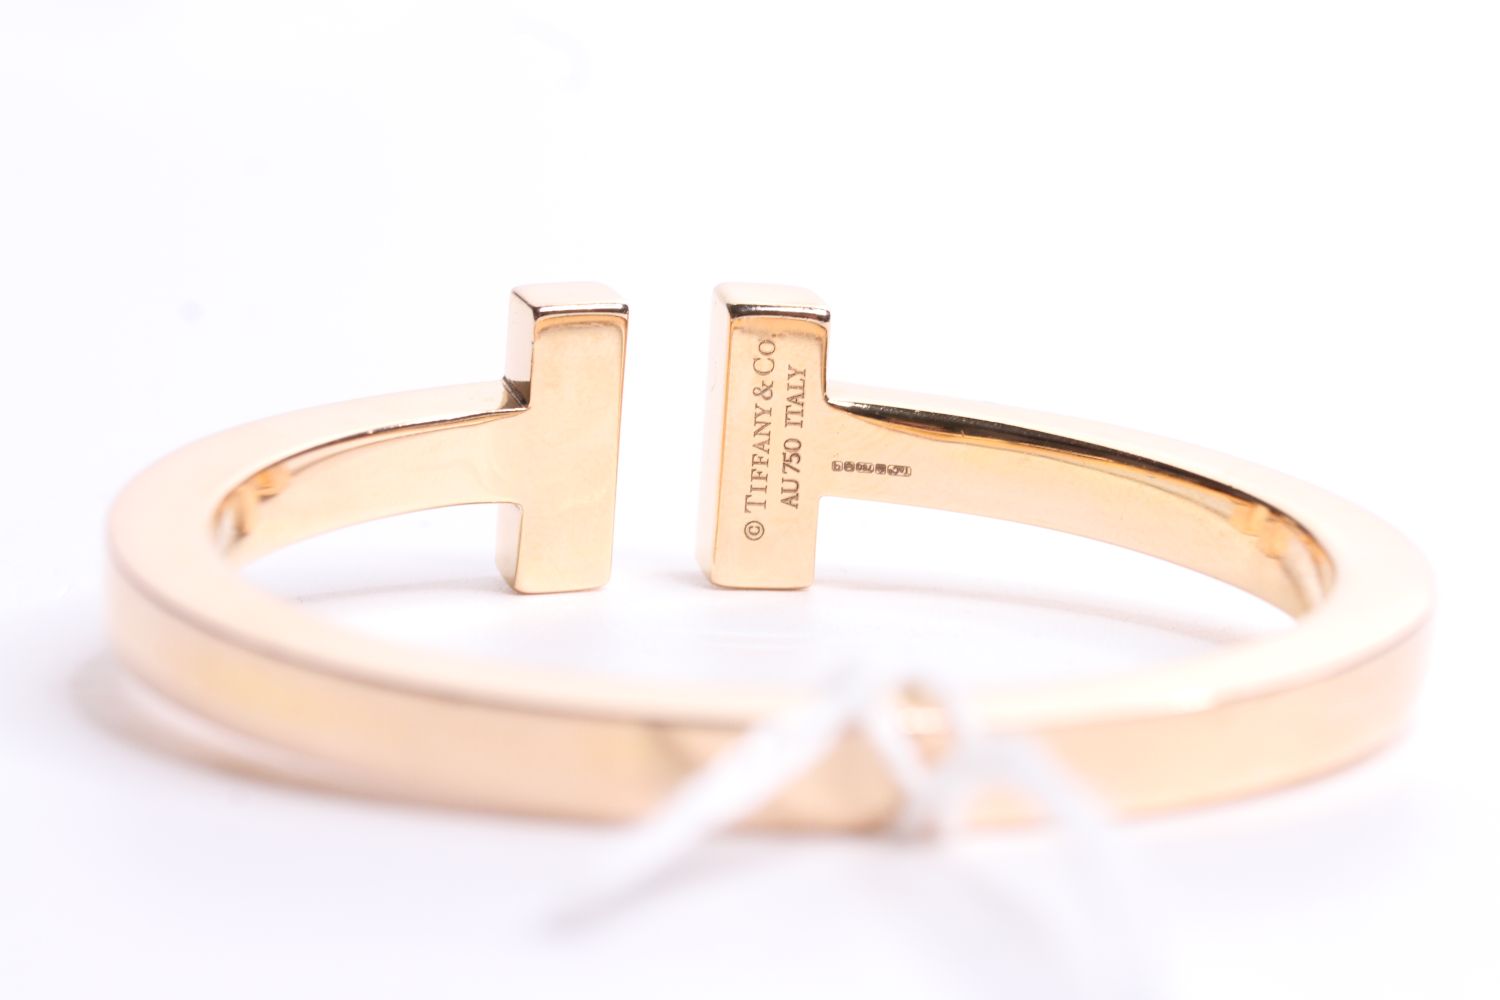 Tiffany & Co T Square Bracelet, 18ct yellow gold, large size will fit a wrist size of up to - Image 3 of 5